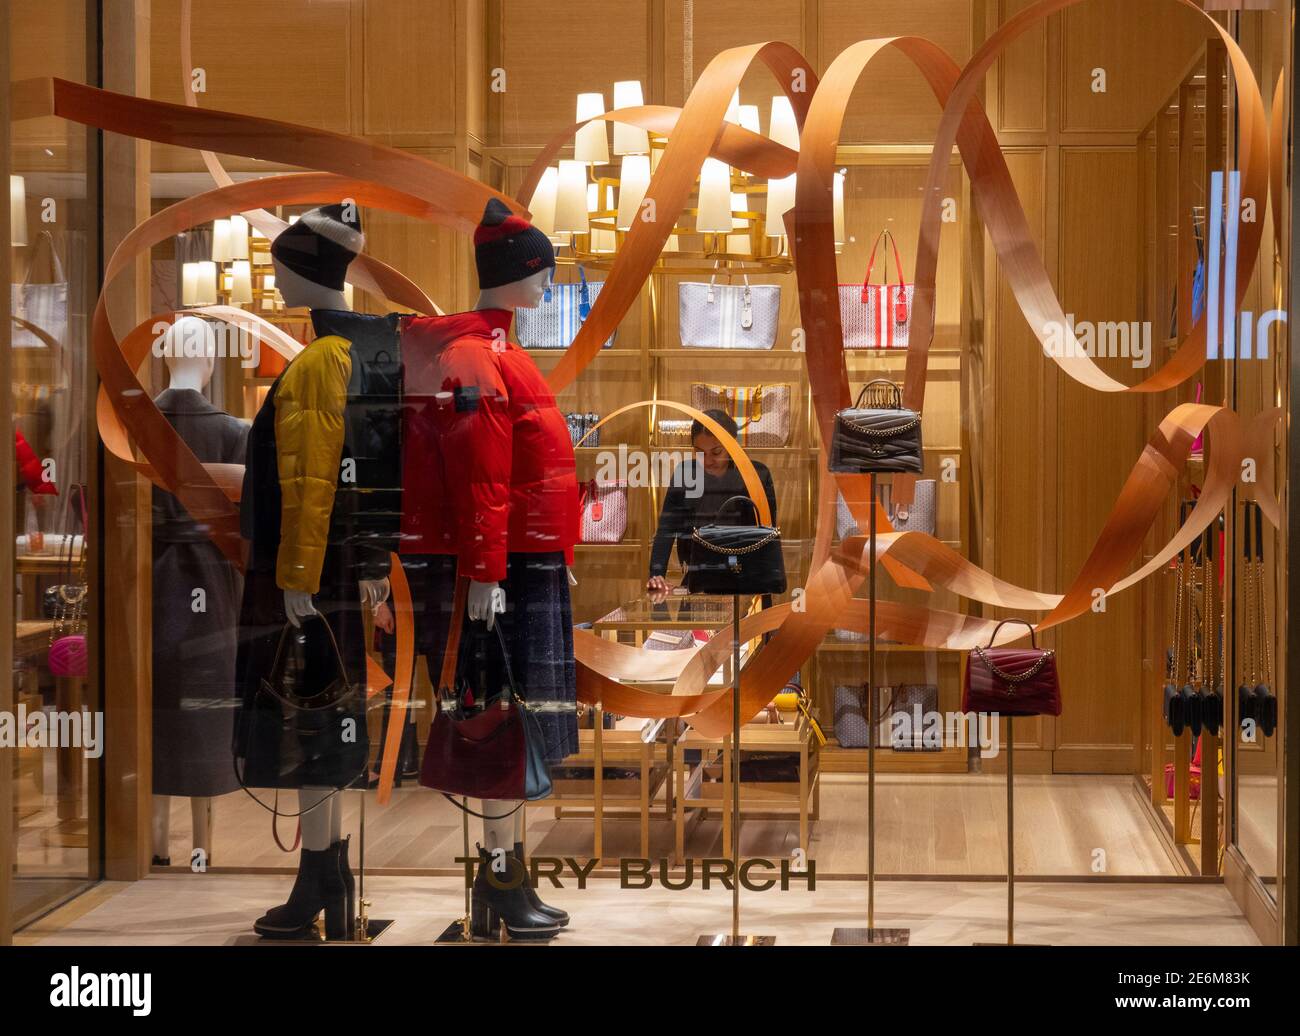 Tory Burch store windows at Hudson Yards shops in Manhattan NYC Stock Photo